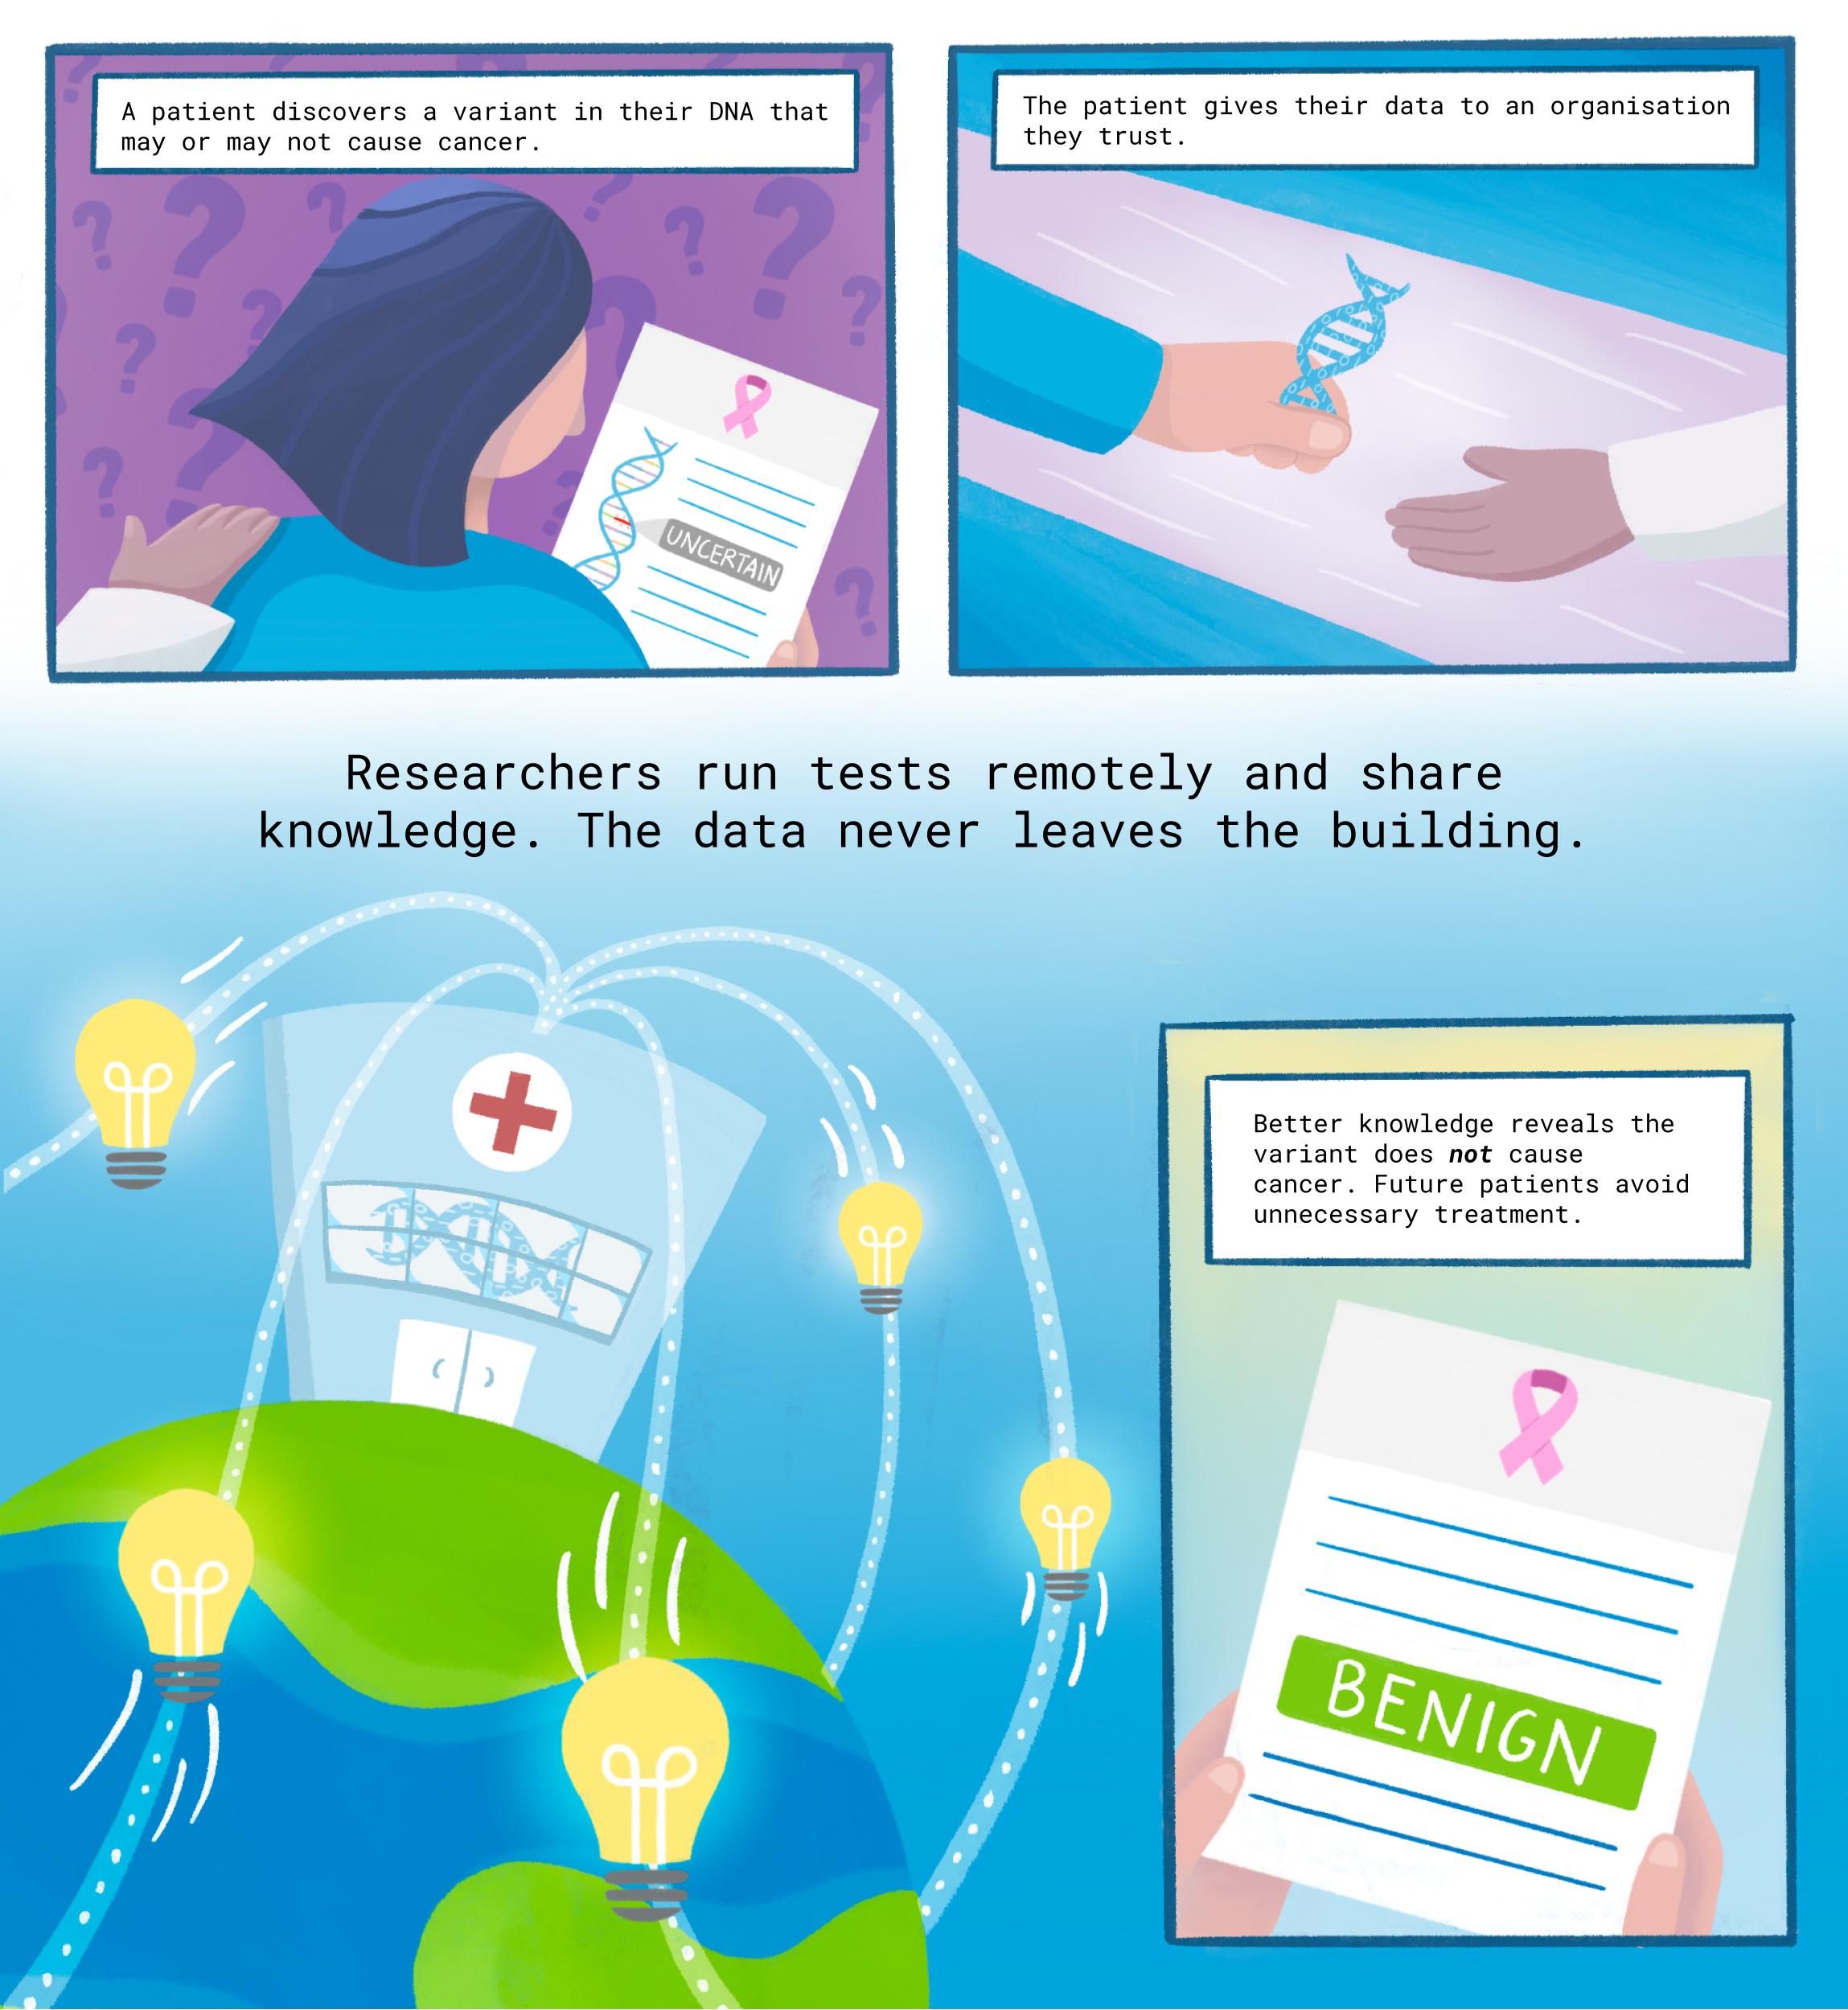 Comic shows a patient discovering a variant in their DNA that may or may not cause cancer, giving their data to an organisation they trust, where researchers run tests remotely. Better knowledge reveals the variant was benign and does not cause cancer, allowing future patients to avoid unnecessary treatment.